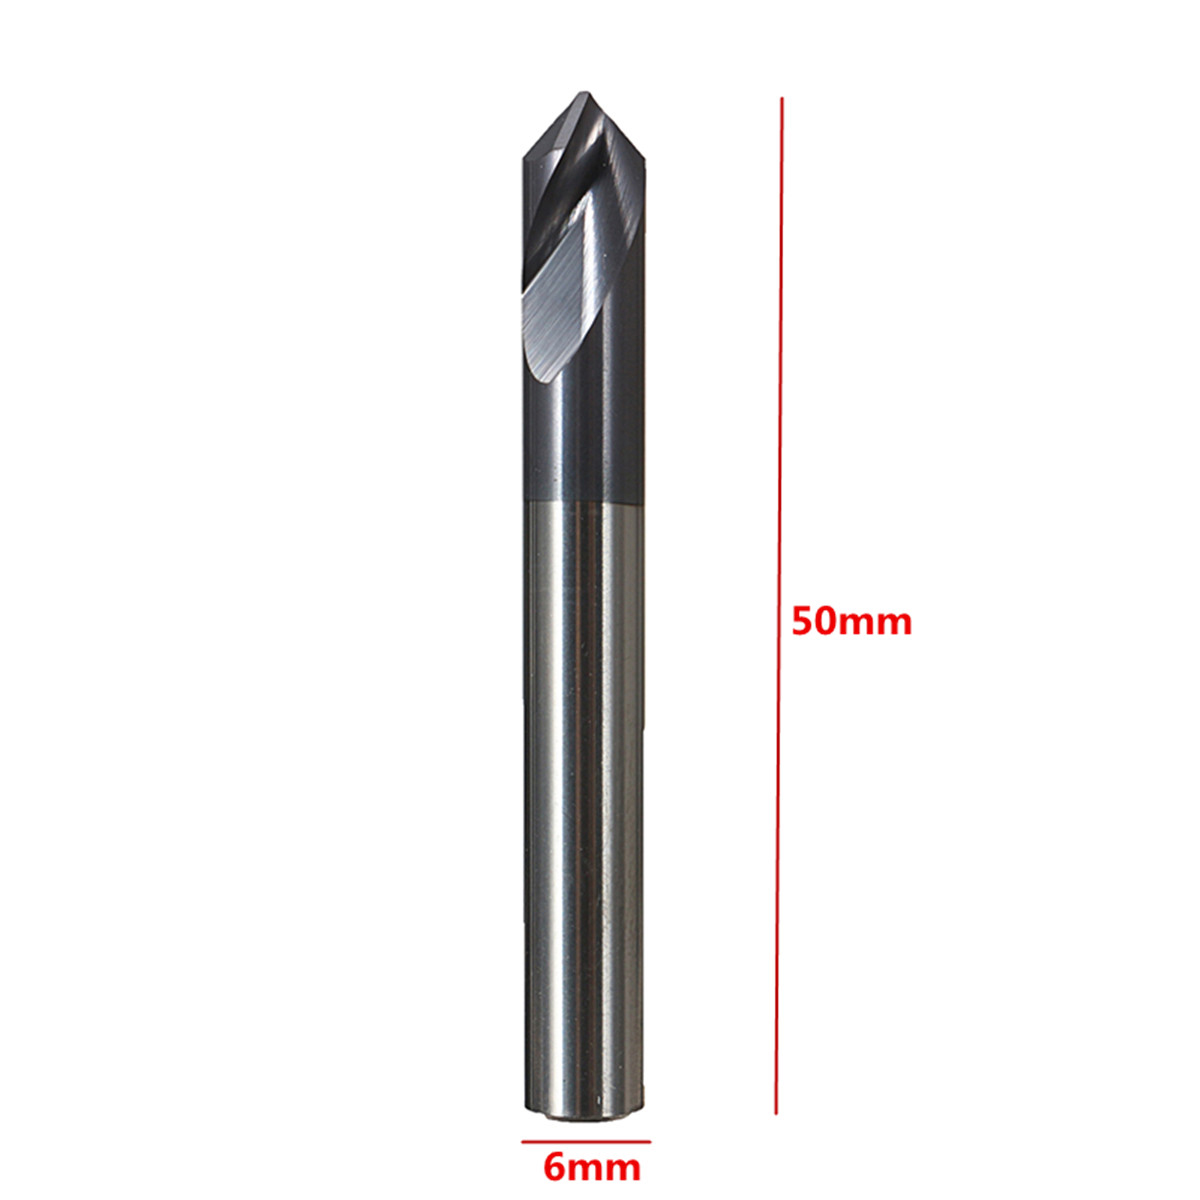 Drillpro-5pcs-6mm-90-Degree-Chamfer-Mill-2-Flutes-HRC45-Carbide-End-Milling-Cutter-1607282-8